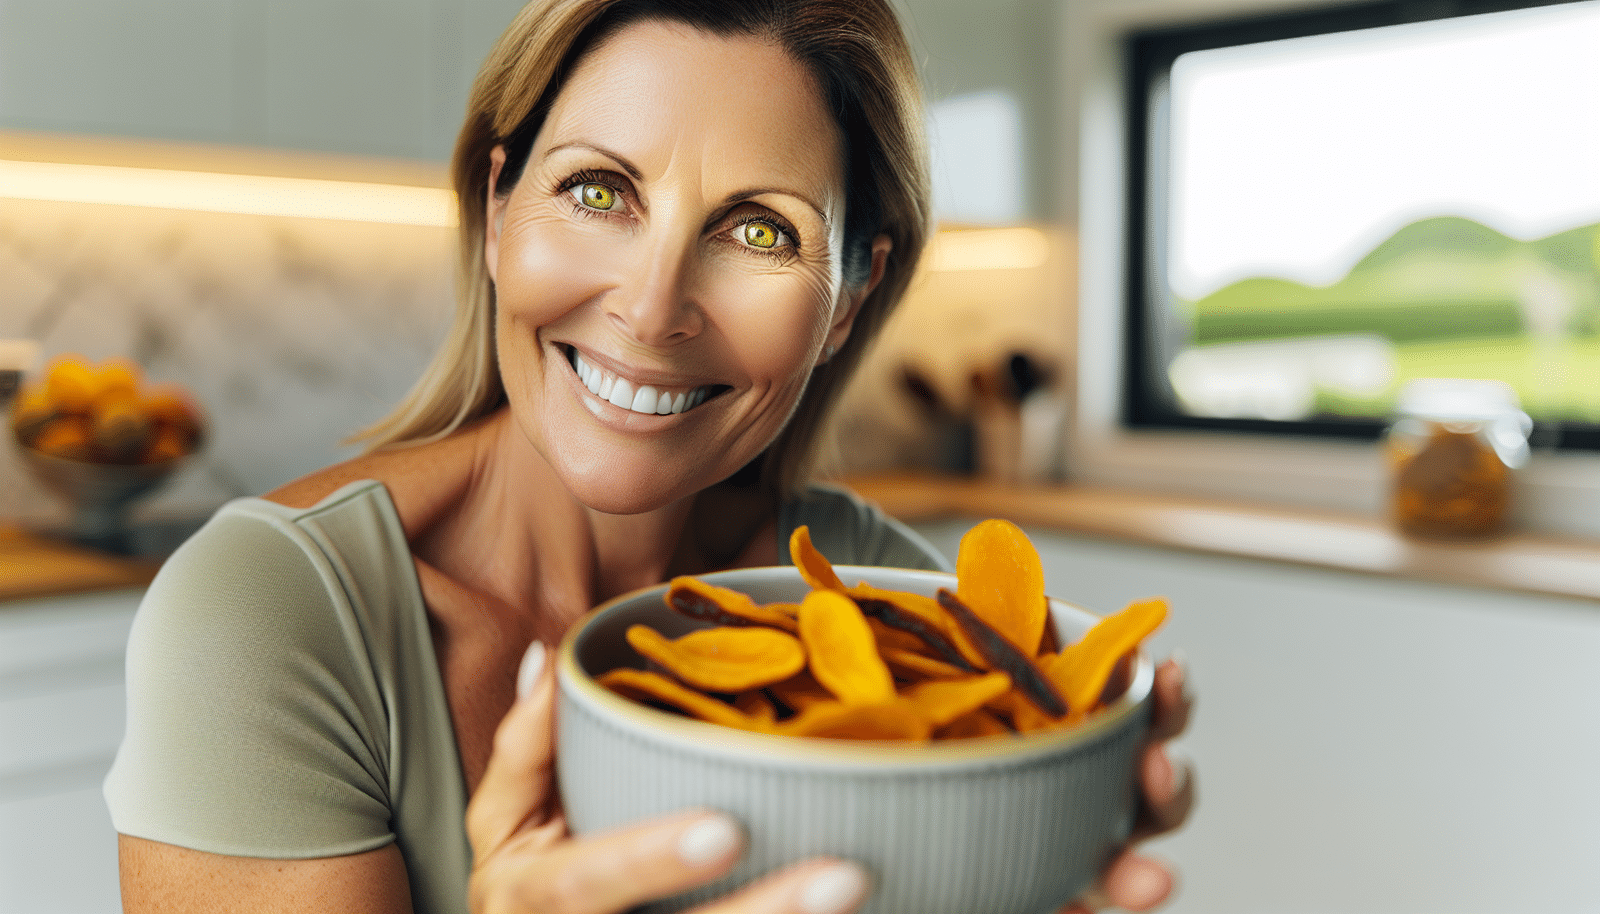 Person enjoying a healthy lifestyle with dried mango snack